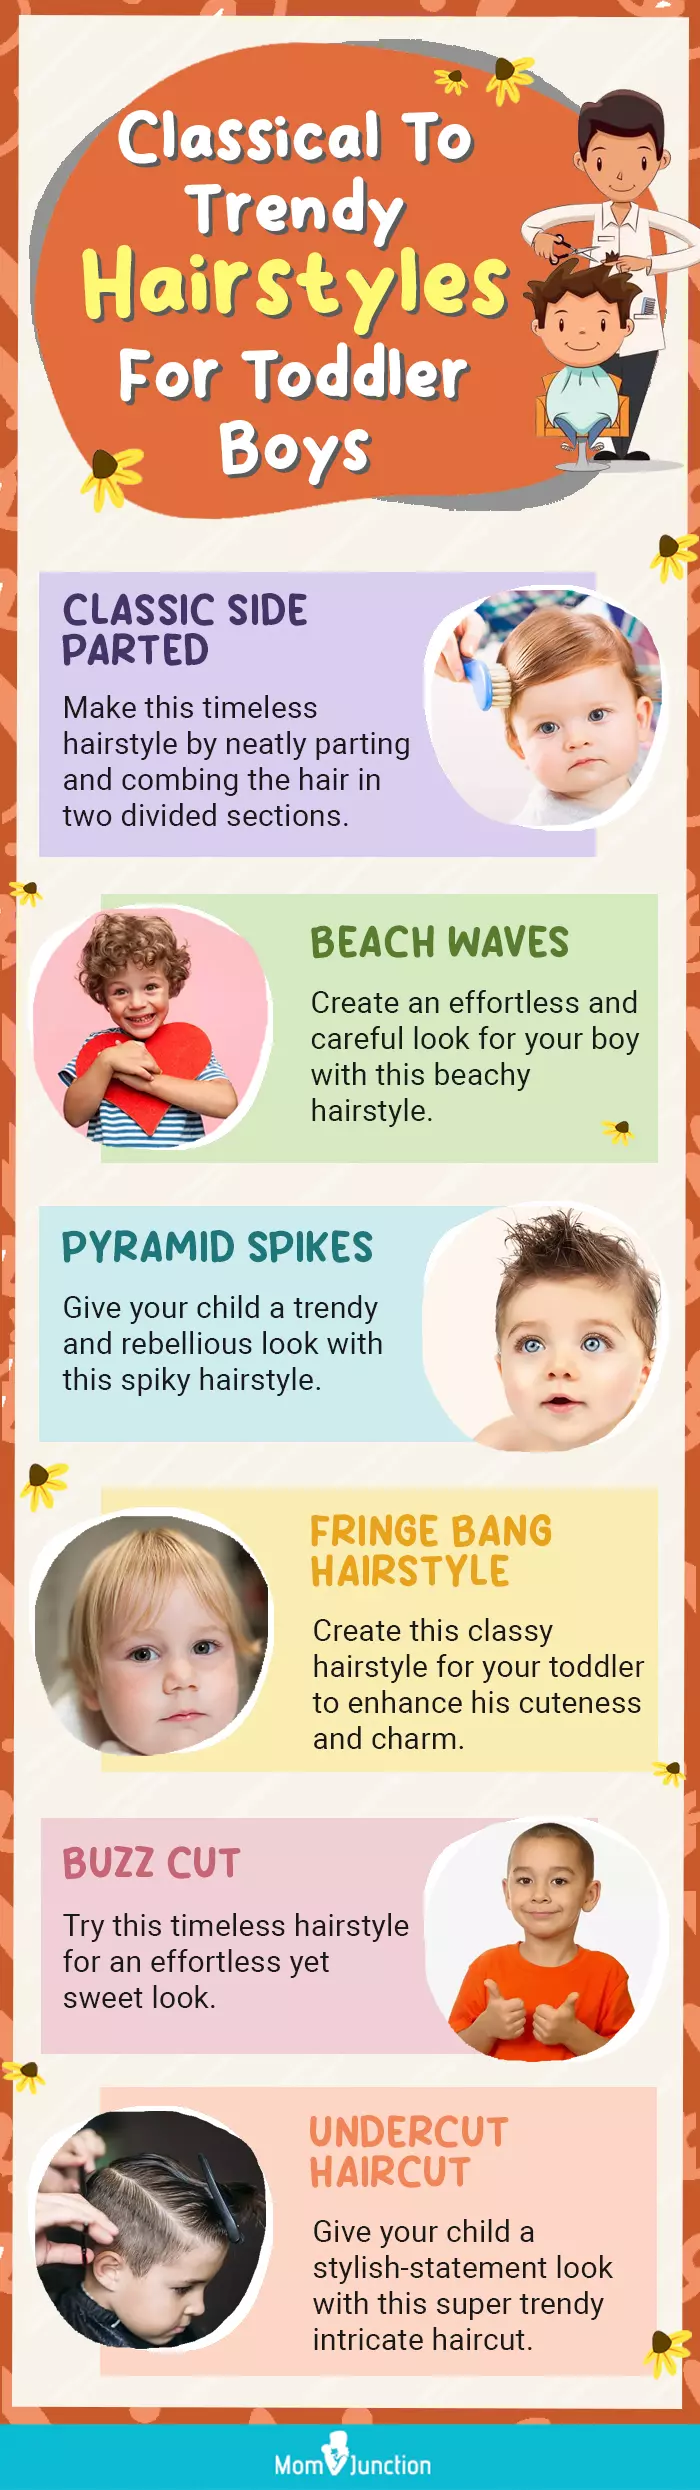 classical to trendy hairstyles for toddlers boys (infographic)